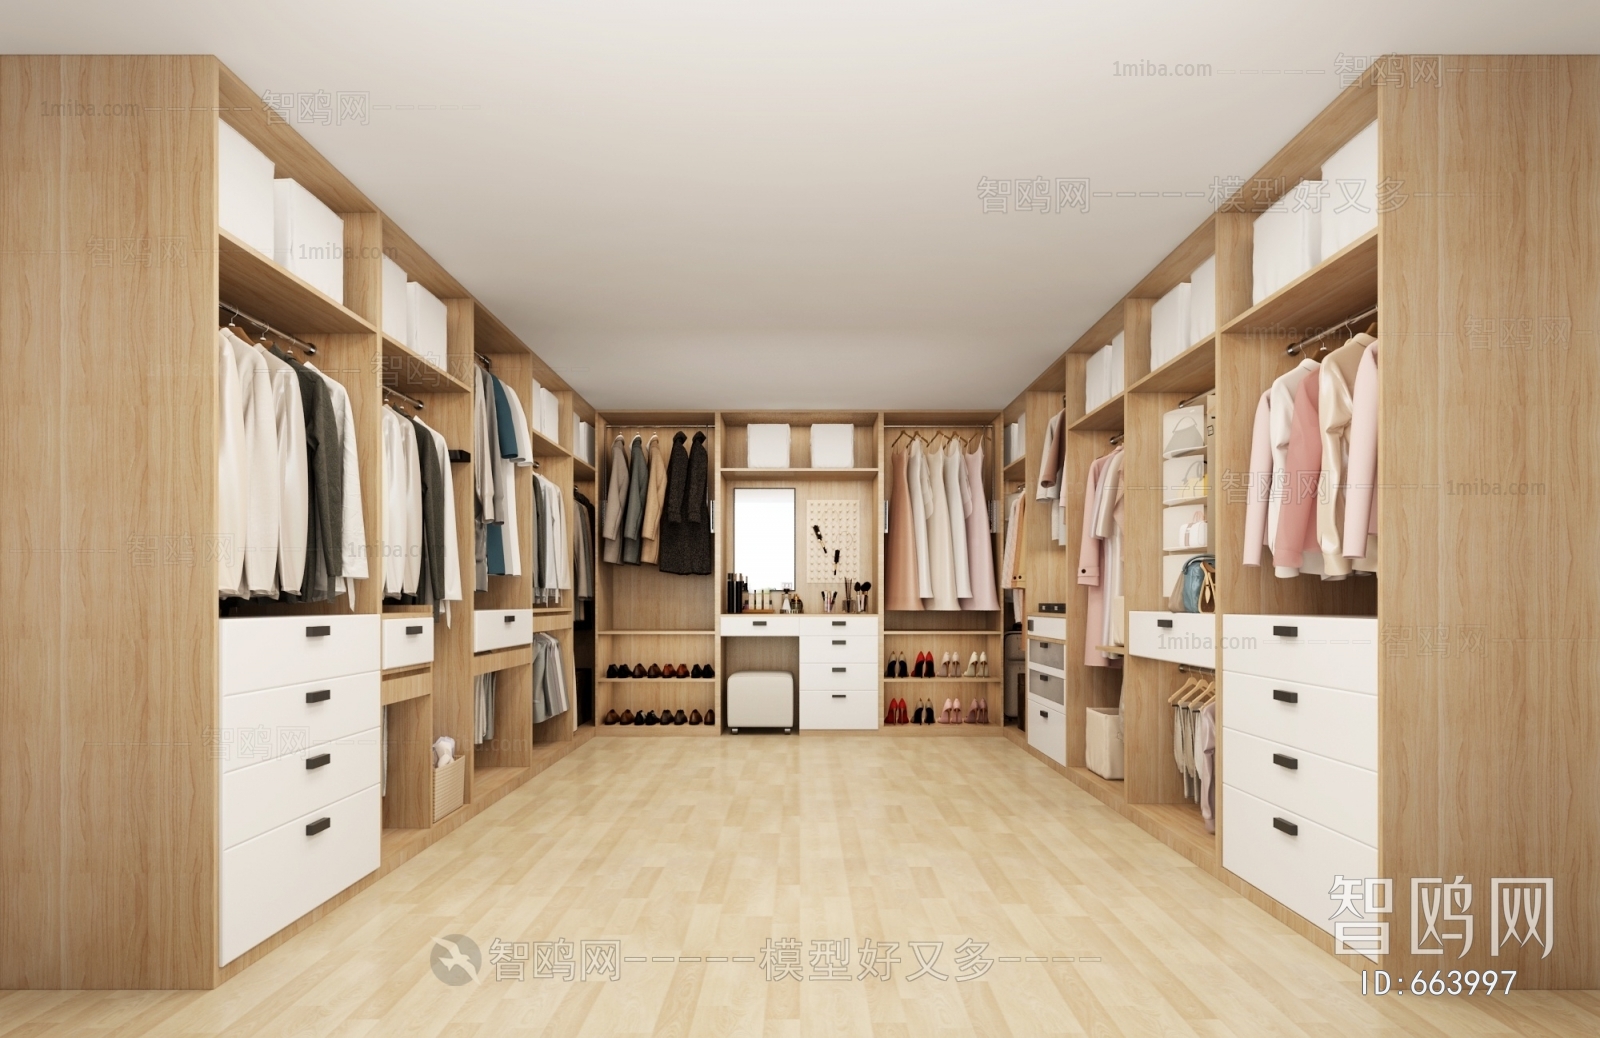 Japanese Style Clothes Storage Area